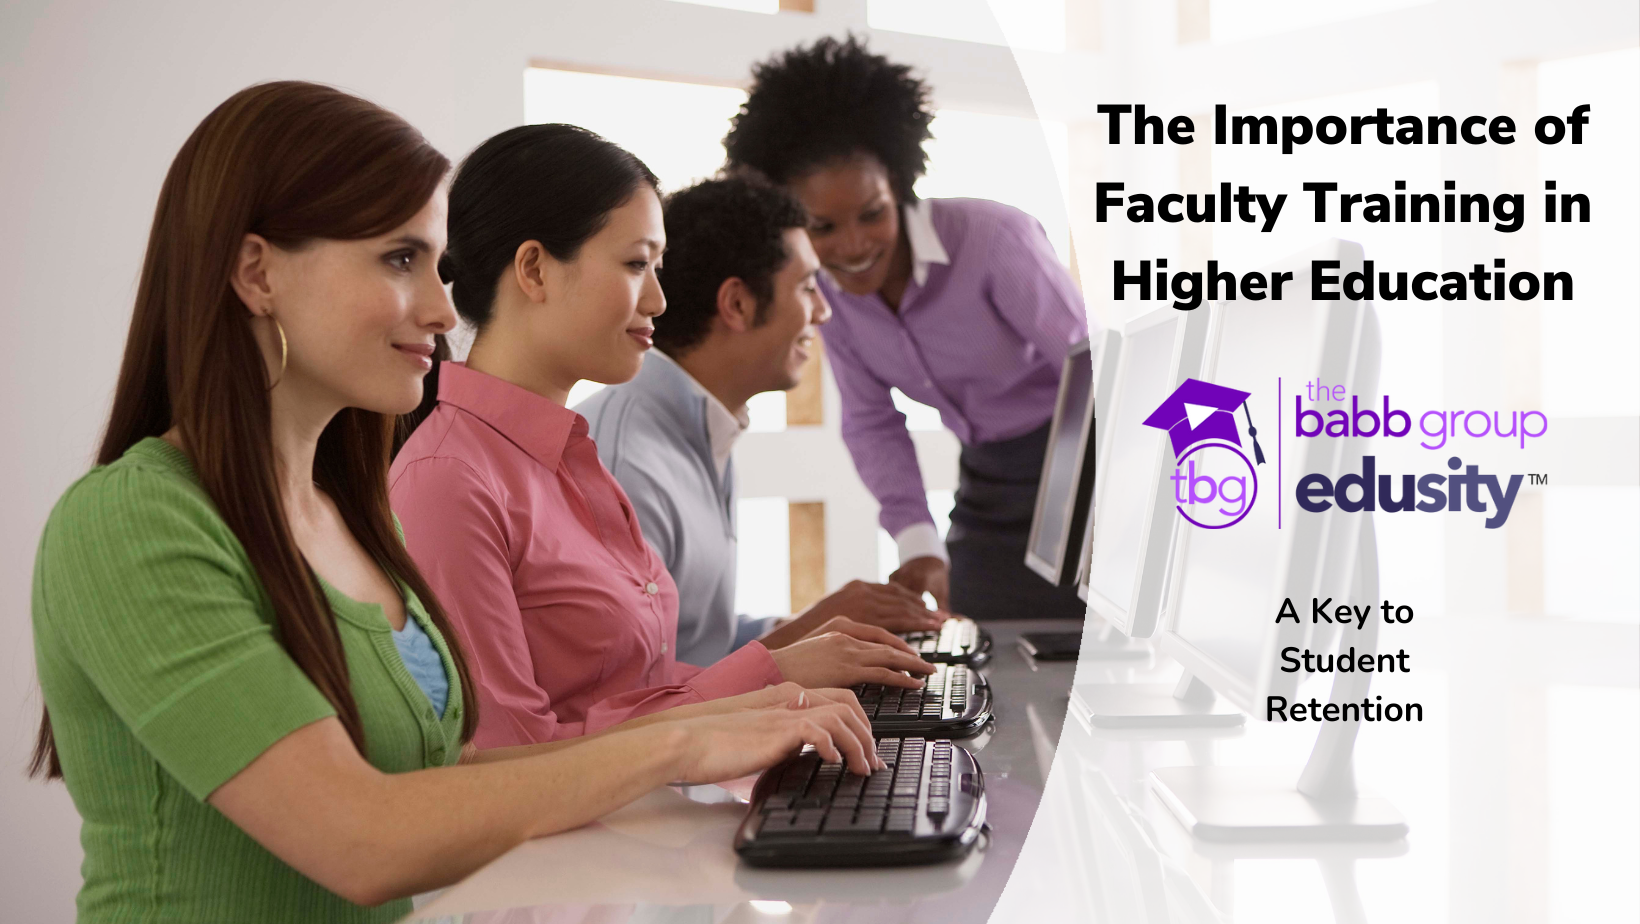 Image of a female teacher working with three students at computers. Text: The Importance of Faculty Training in Higher Education: A Key to Student Retention